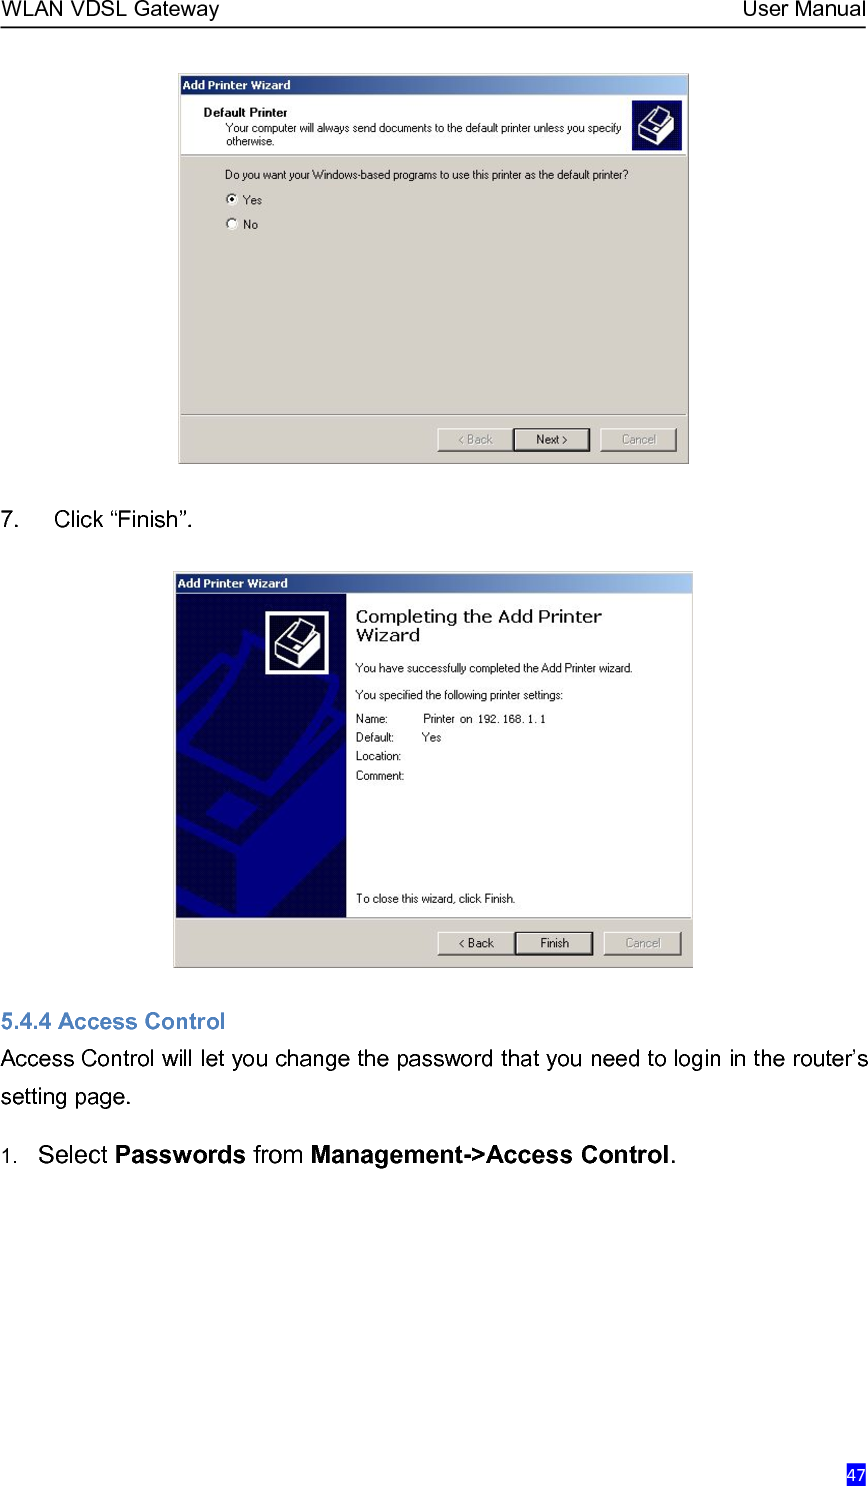 WLAN VDSL Gateway User Manual477. Click “Finish”.5.4.4 Access ControlAccess Control will let you change the password that you need to login in the router’ssetting page.1. Select Passwords from Management-&gt;Access Control.